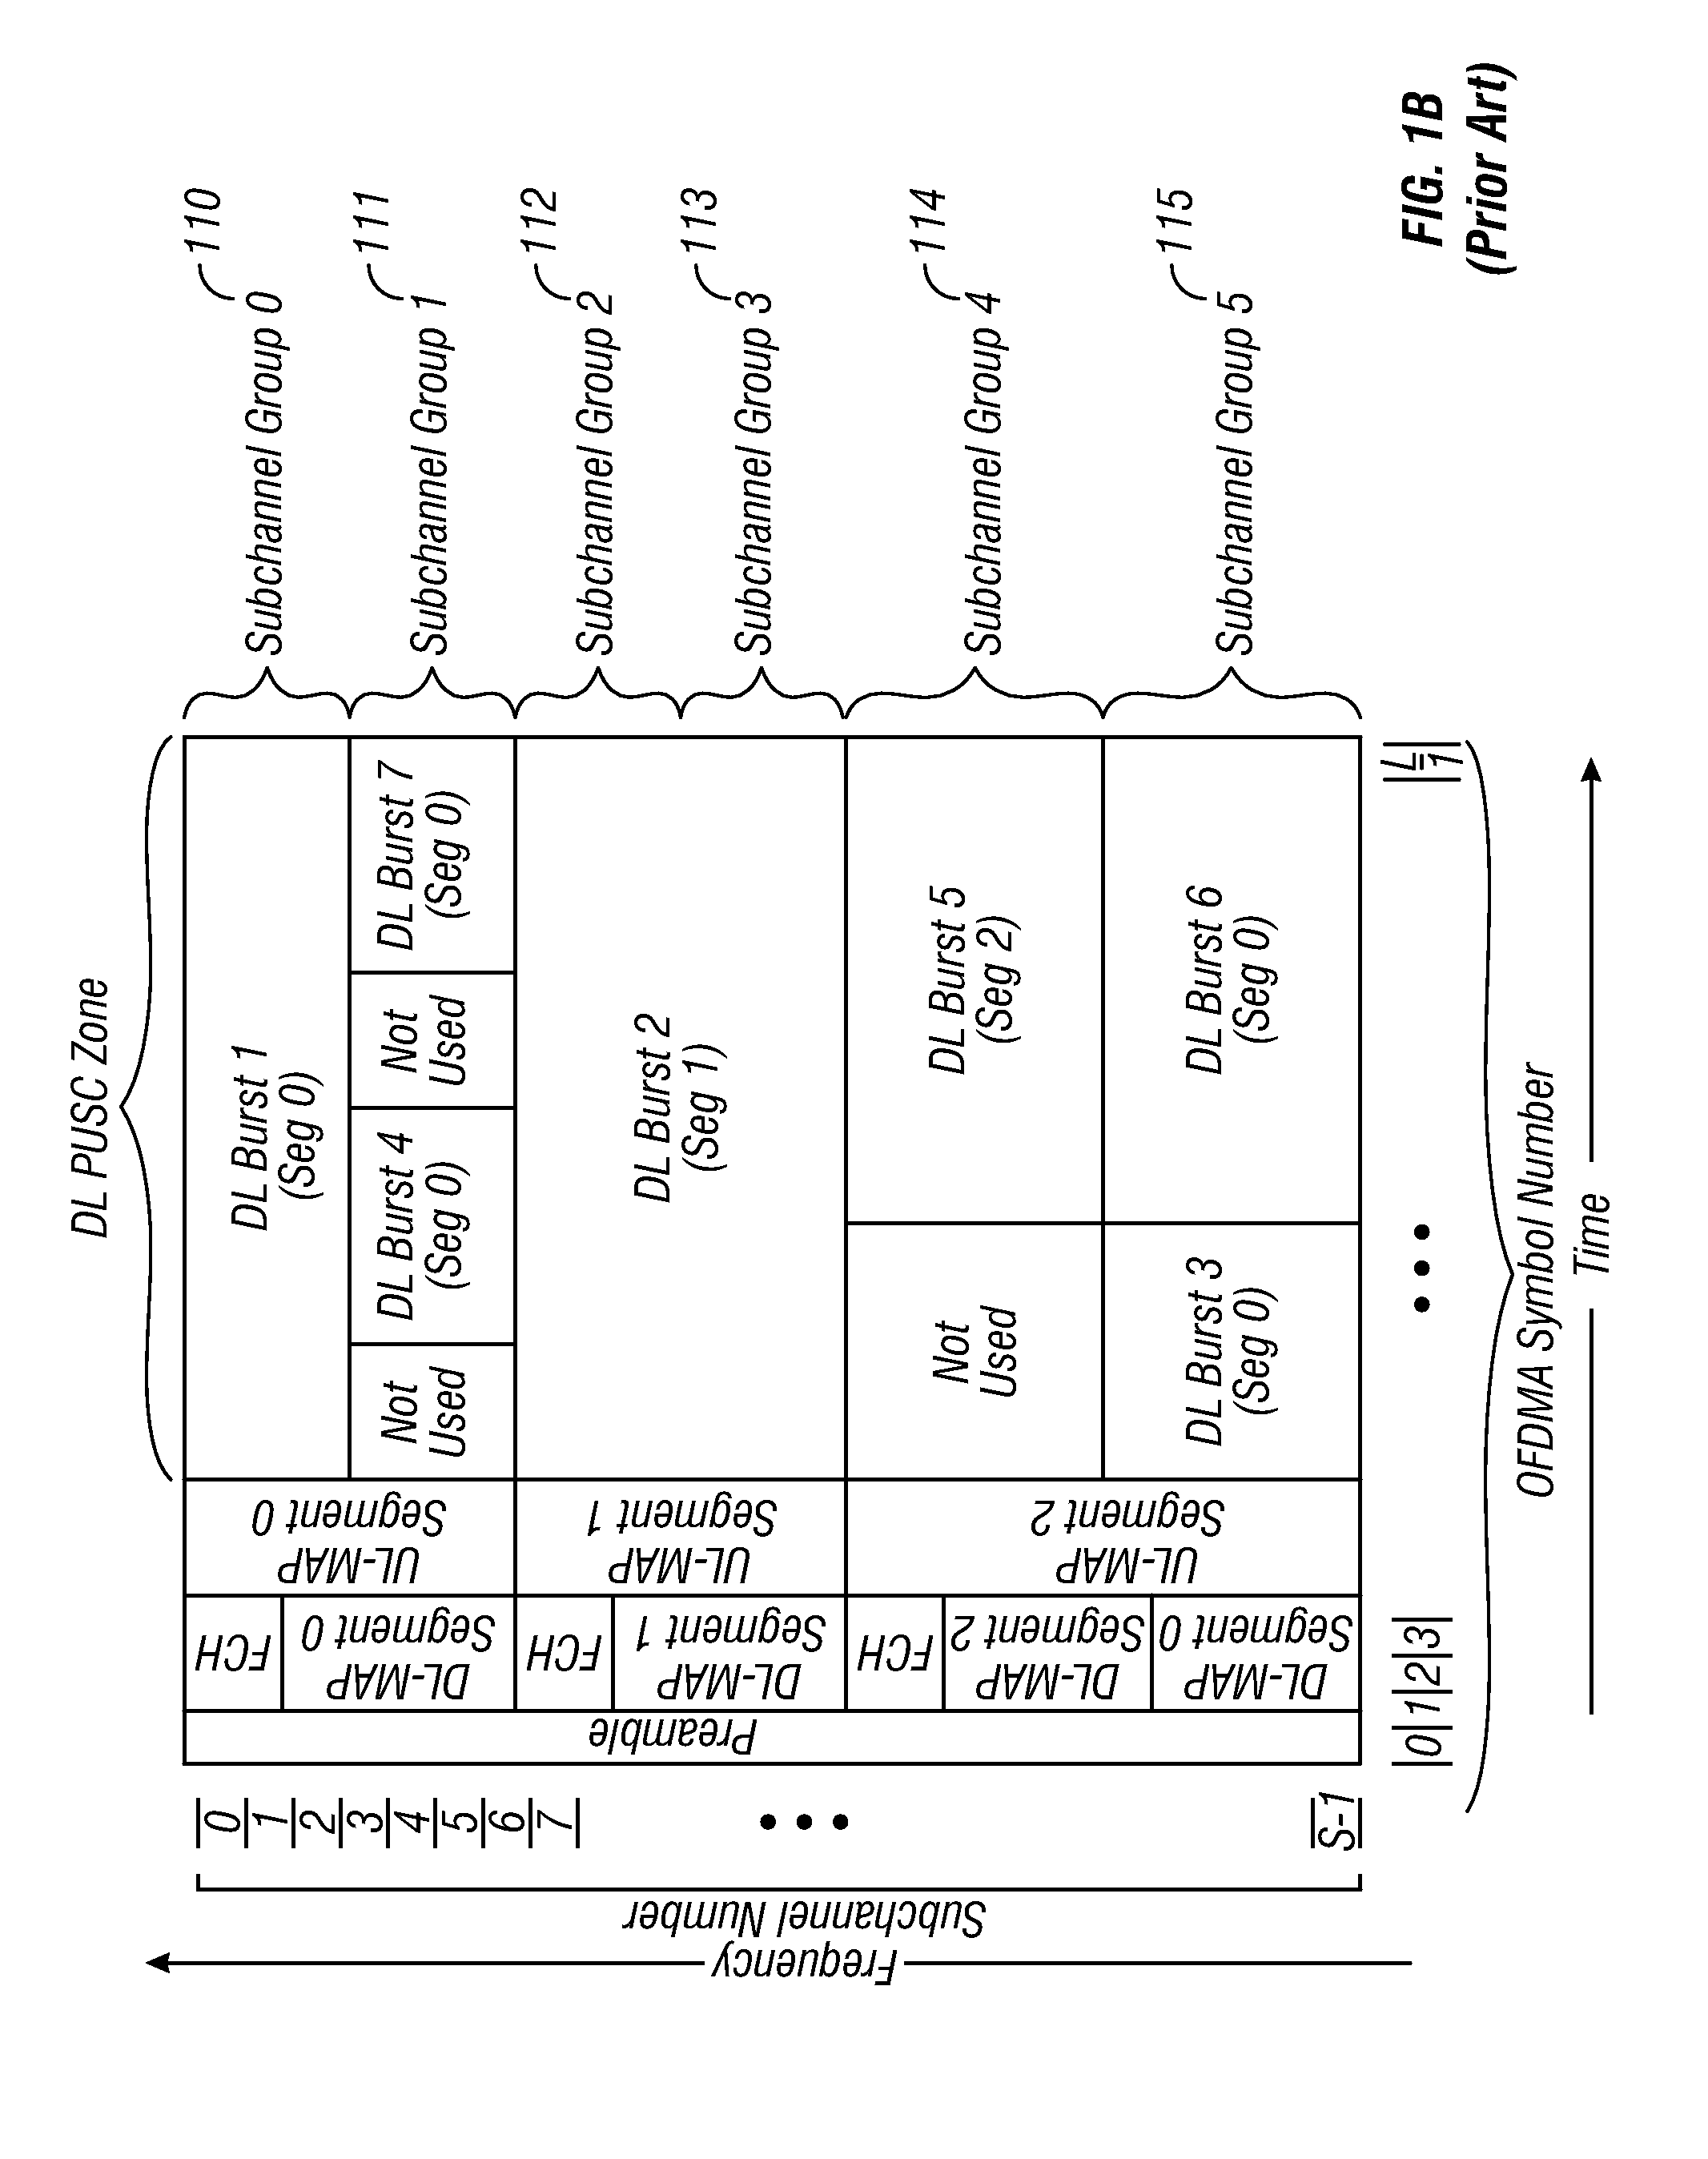 Methods for superframe/frame overhead reduction within ofdma-based communication systems